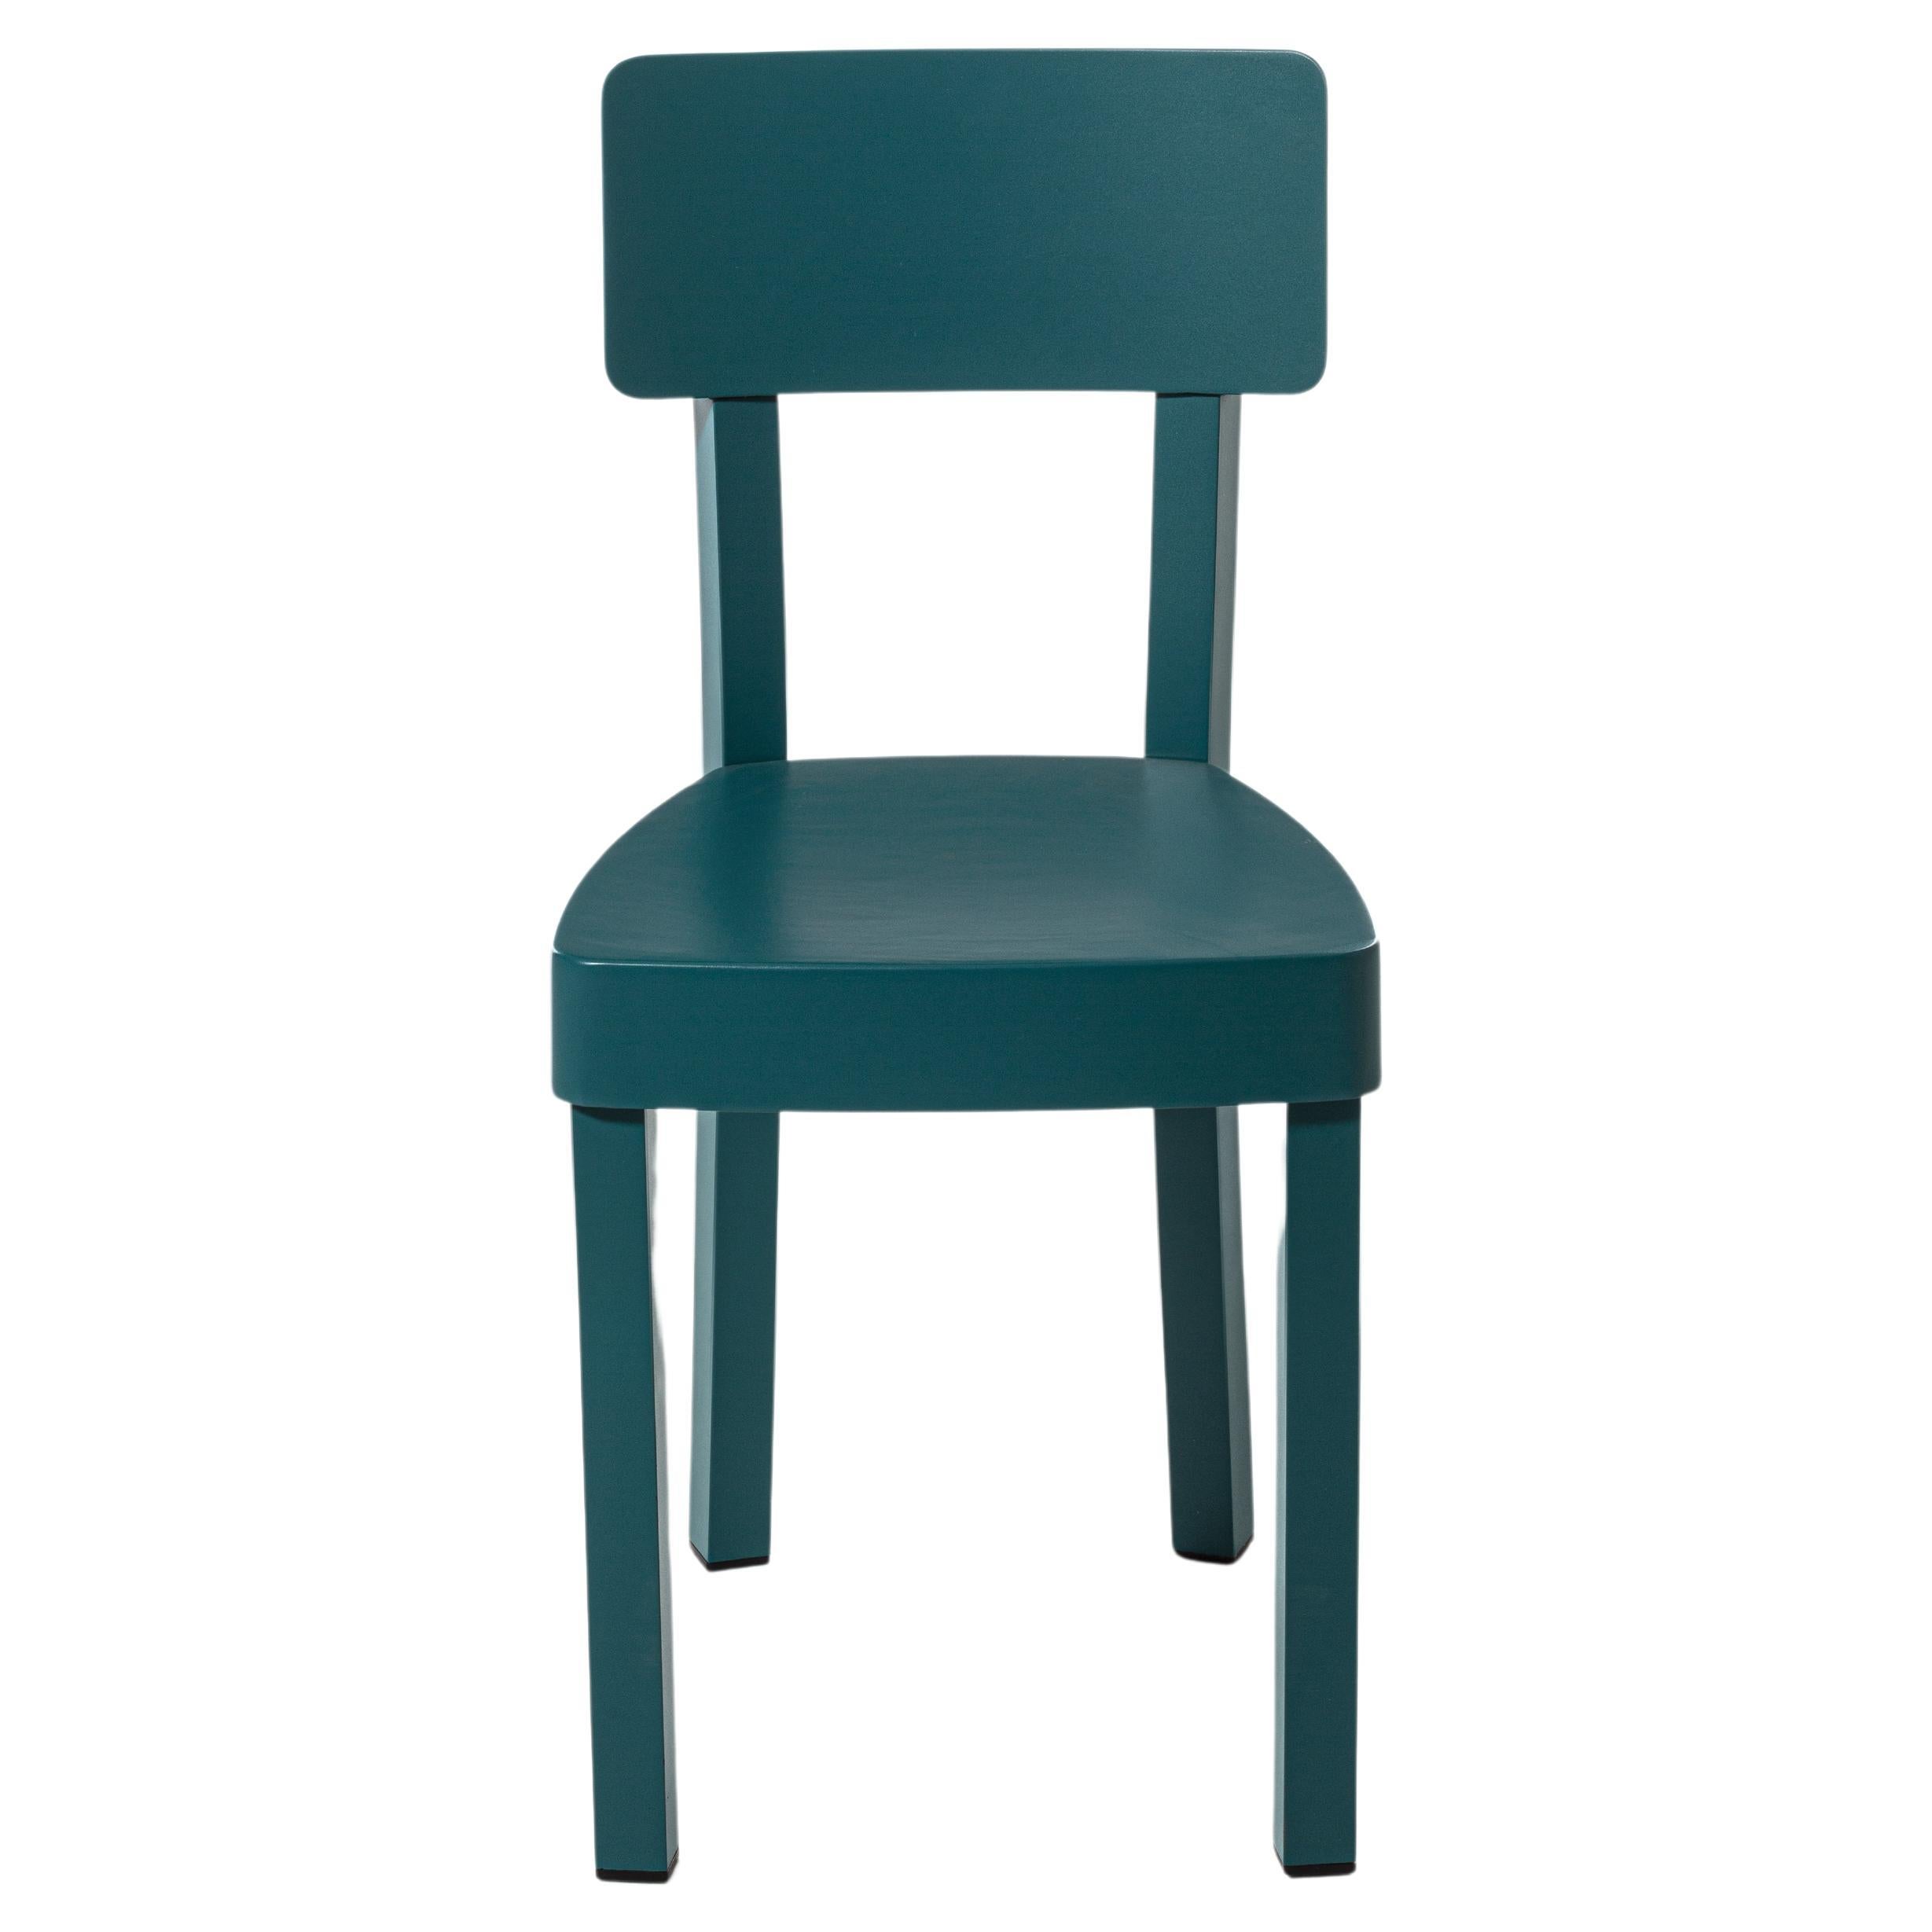 Gervasoni Inout 23 Outdoor Chair in Teal Lacquered Aluminum by Paola Navone